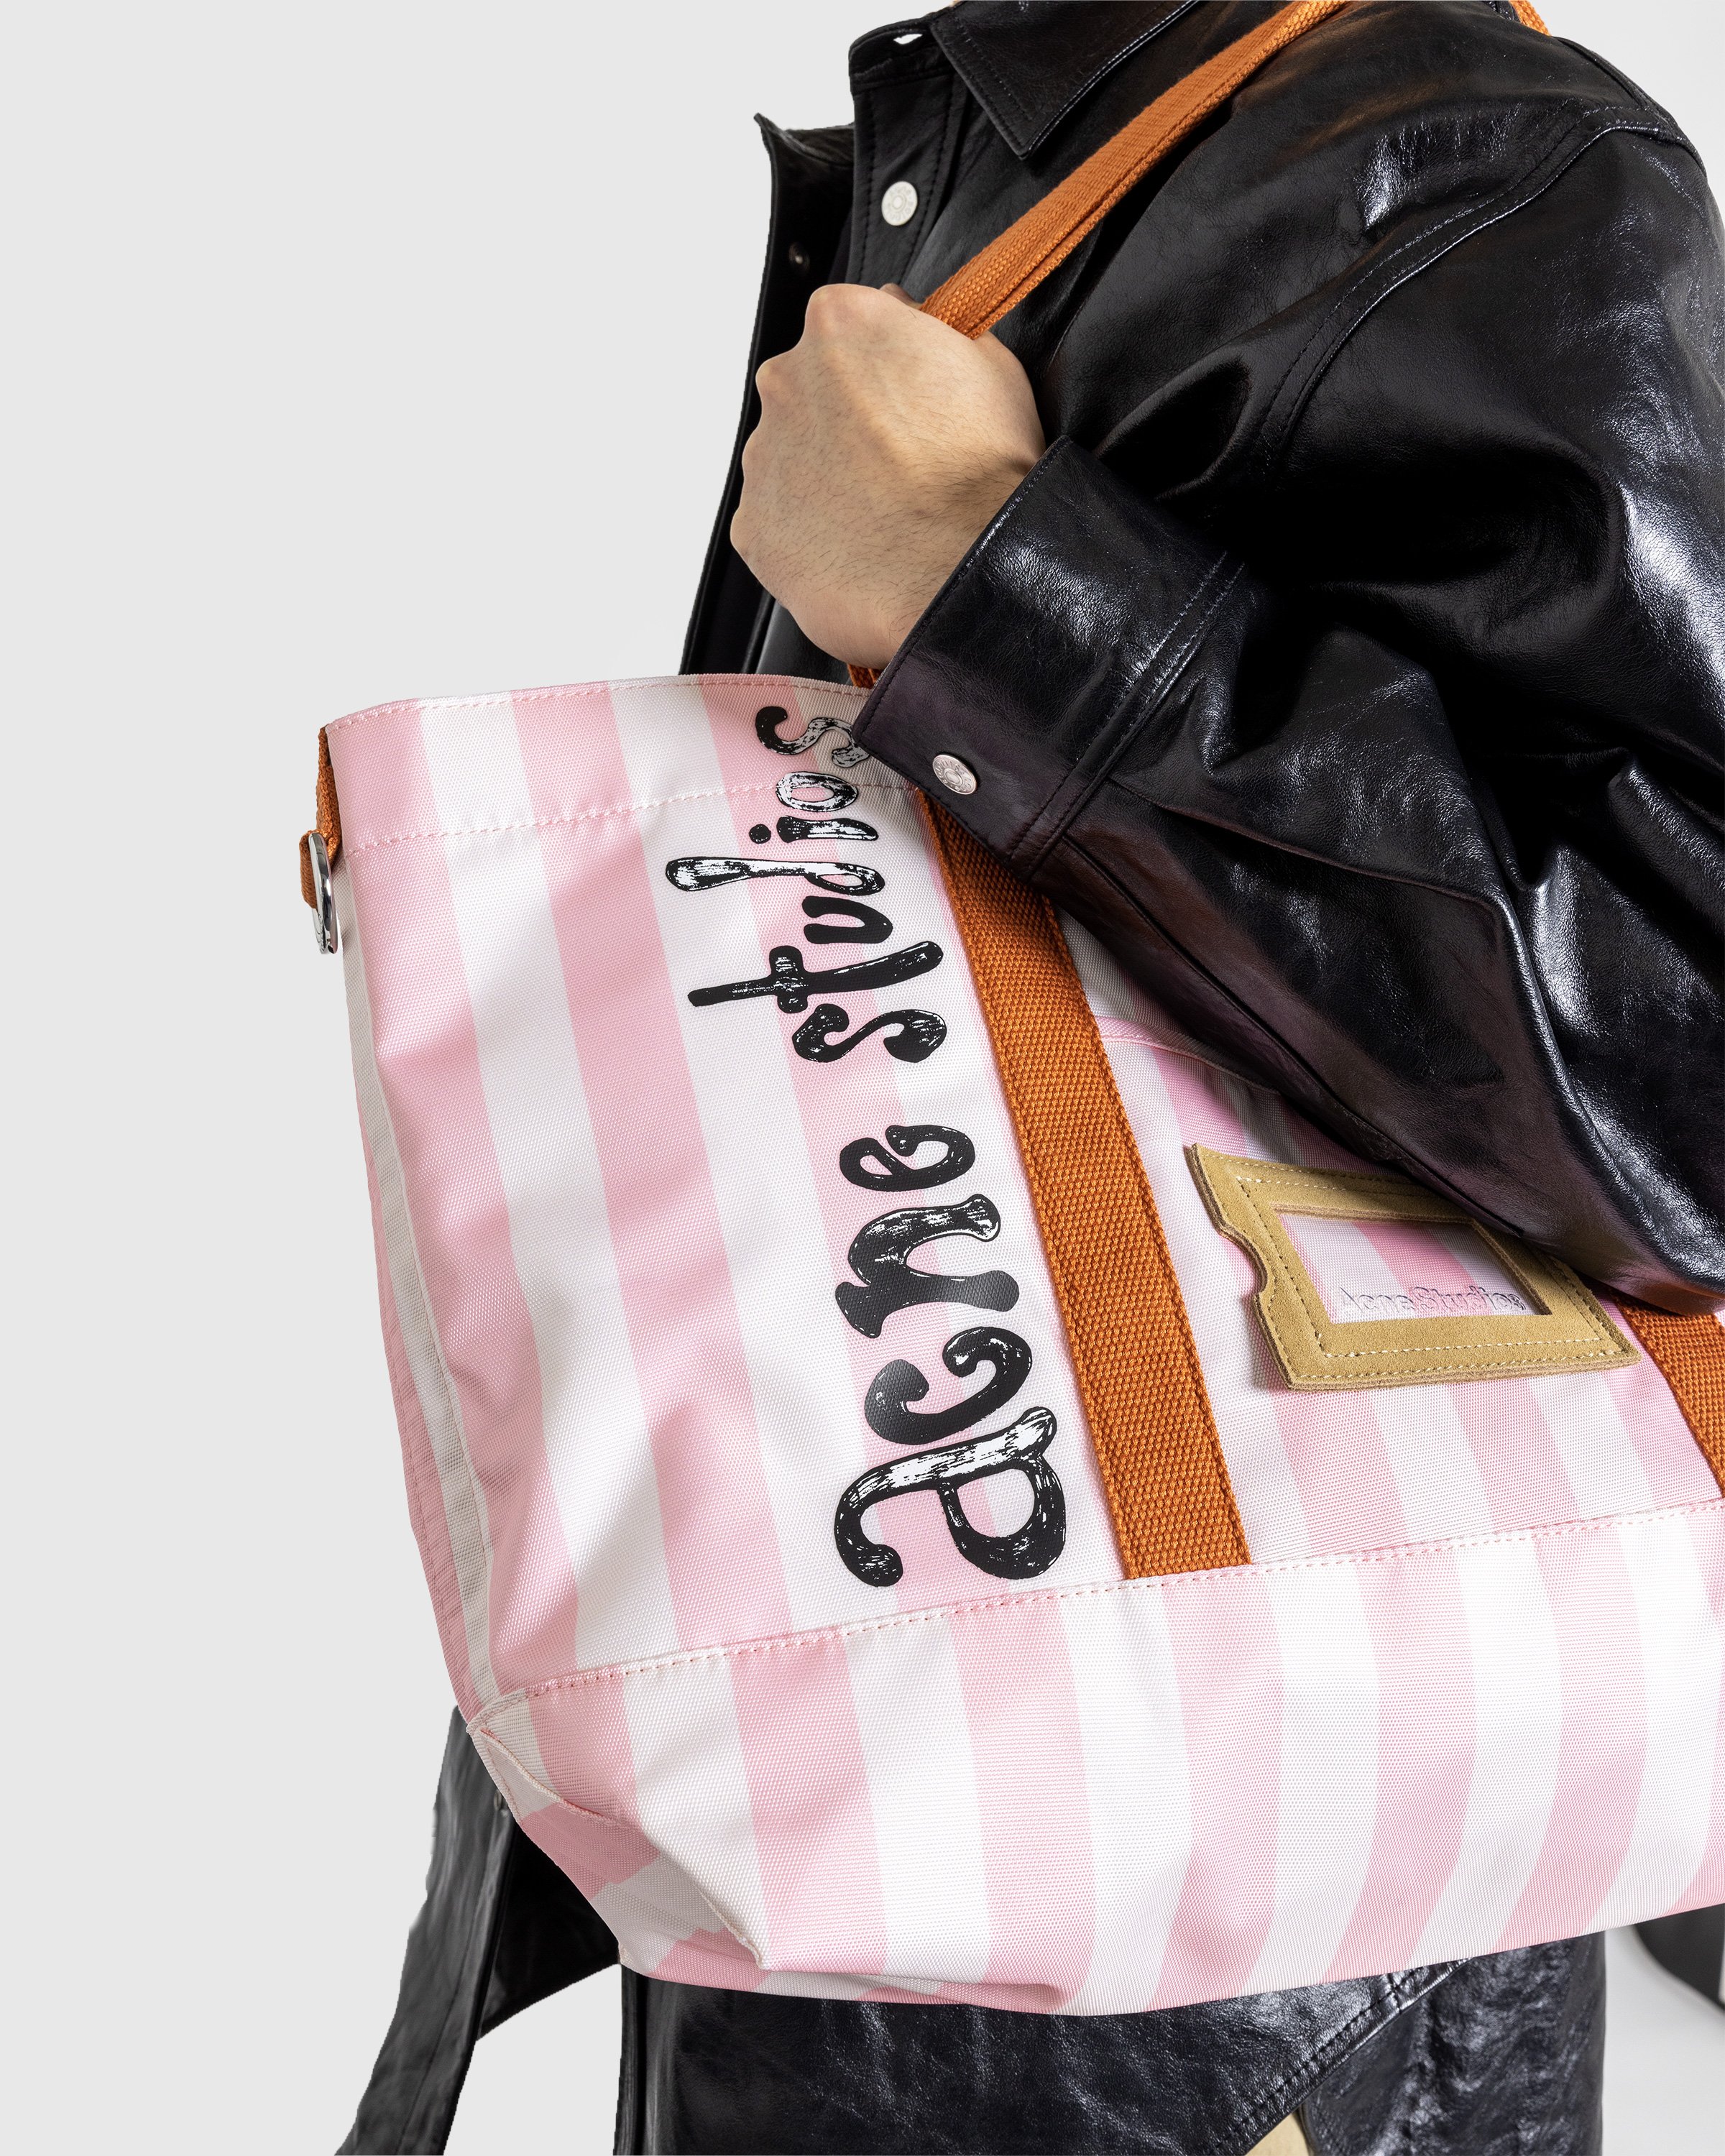 Acne Studios - FN-UX-BAGS000153 Light Pink/ Off White - Accessories - Pink - Image 3